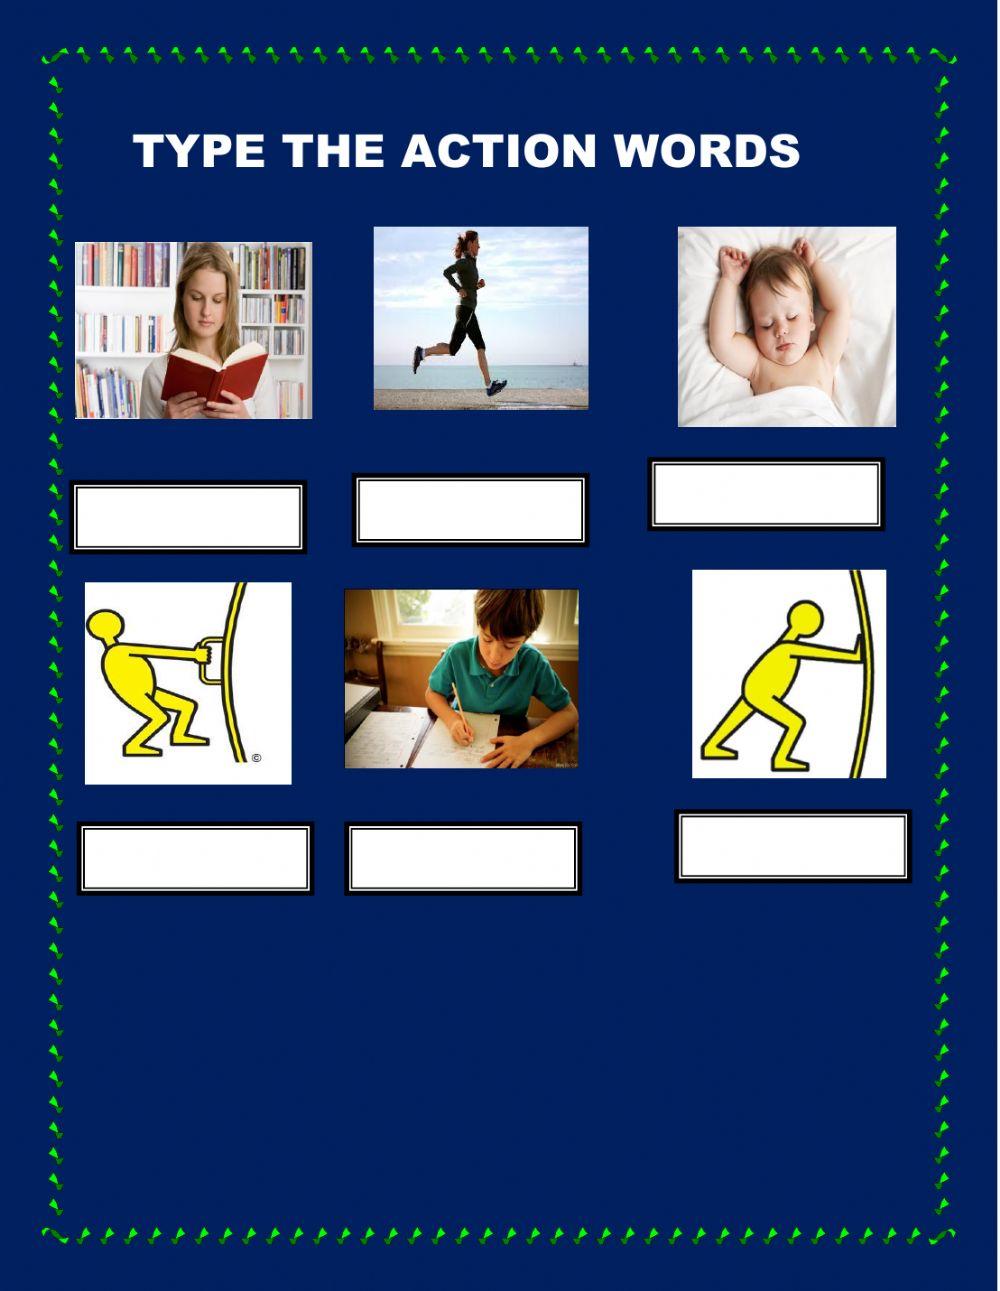 TYPE THE ACTION WORDS